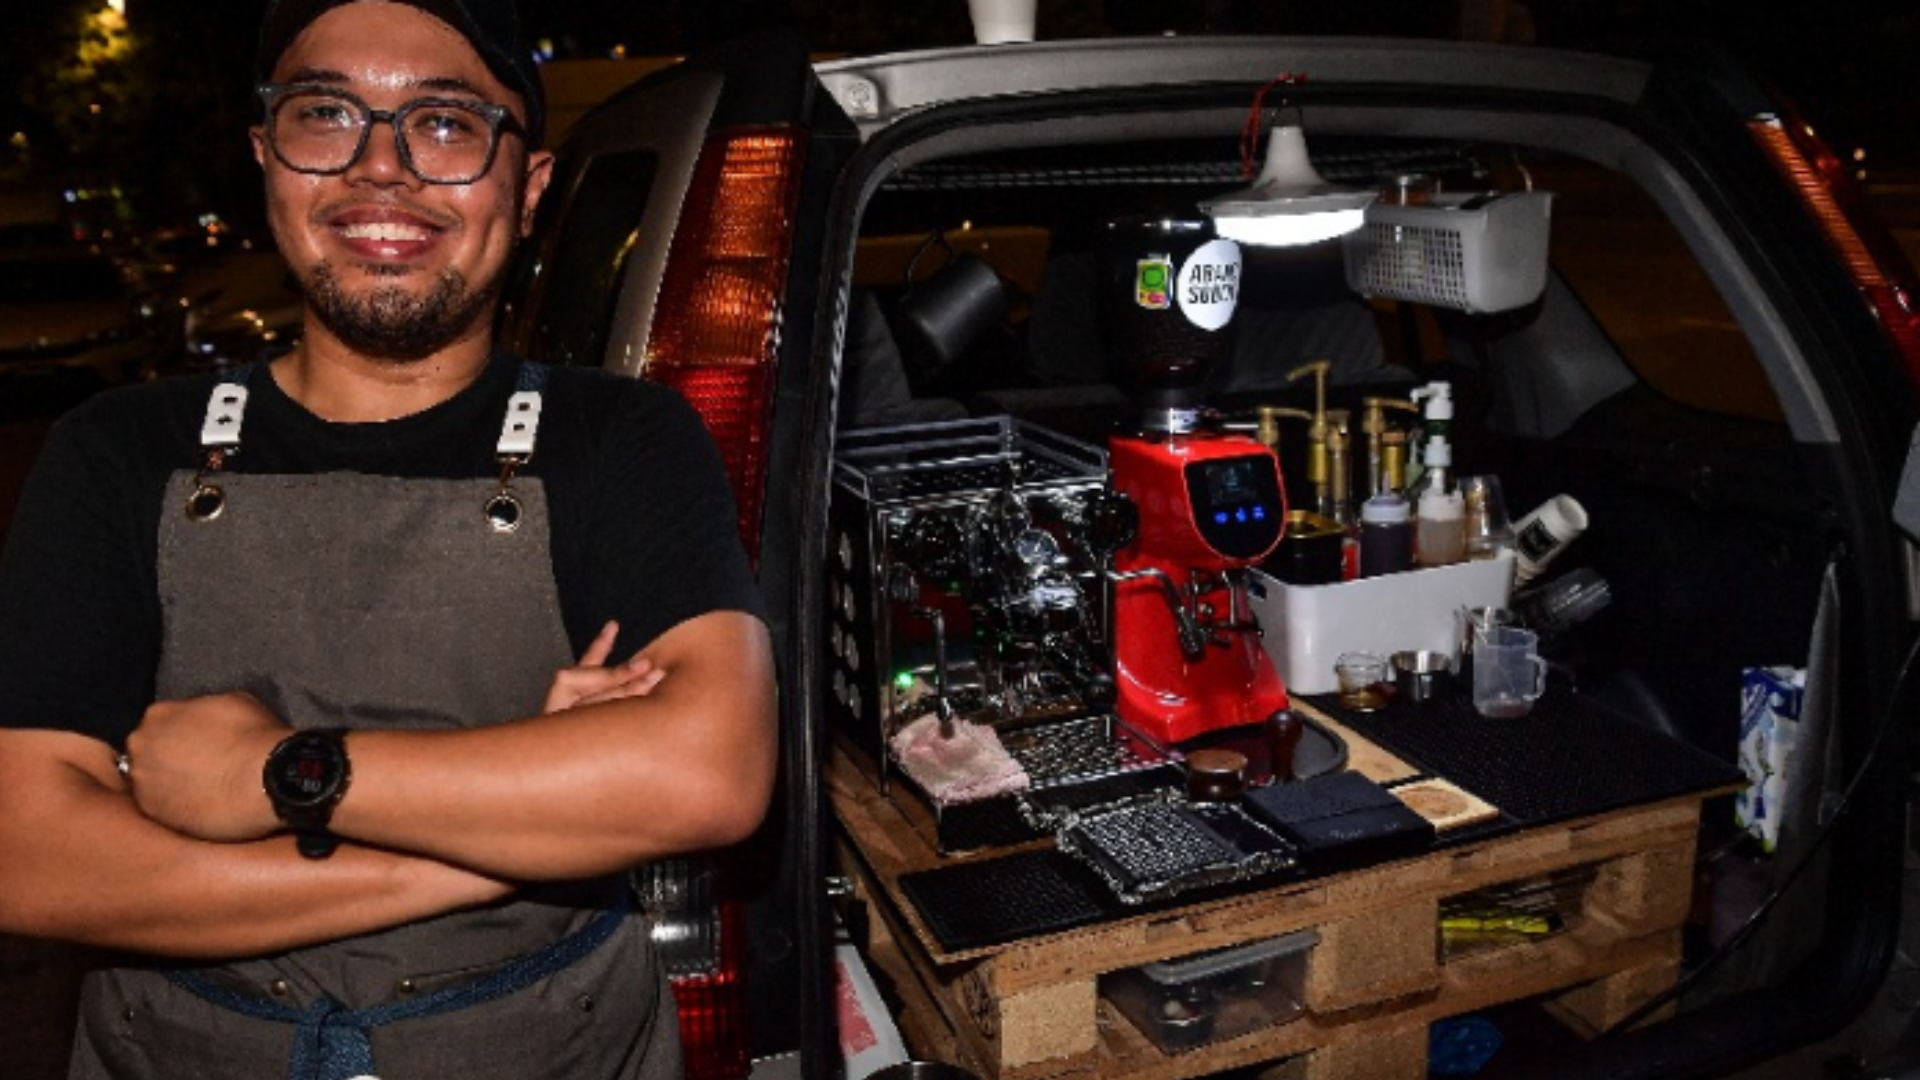 From struggles of selling coffee to paying for his own wedding thanks to this coffee business.